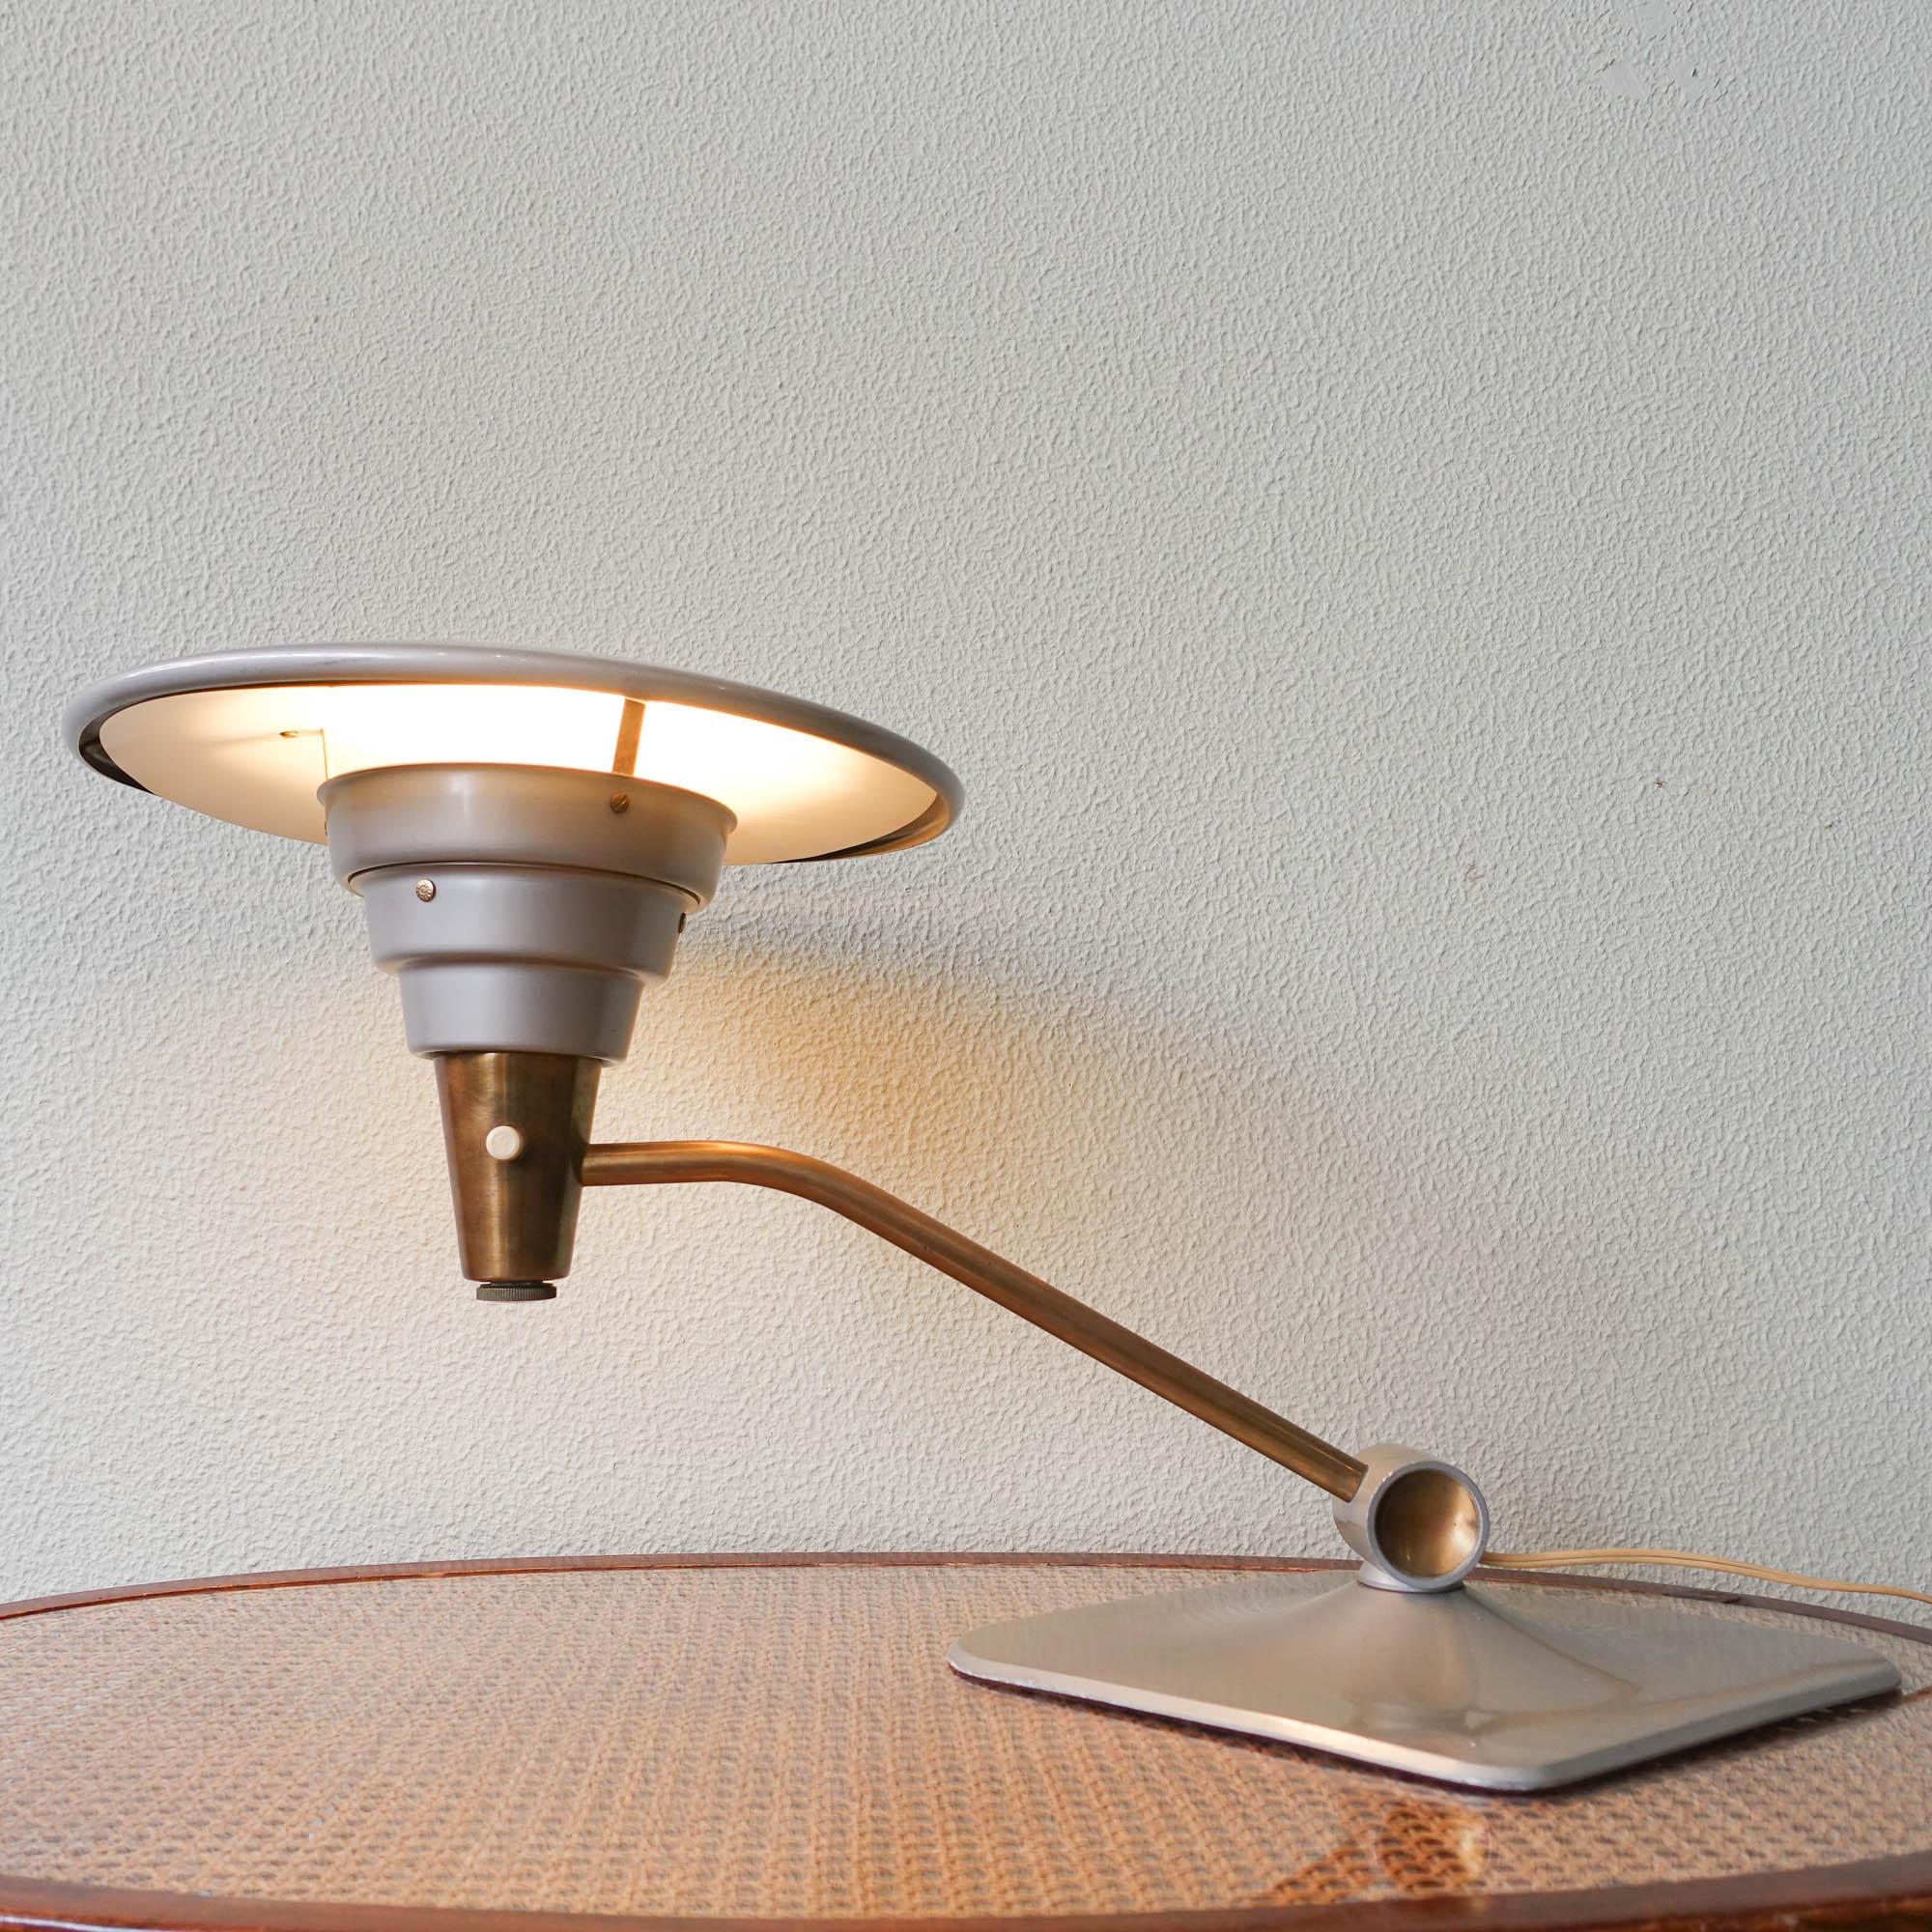 This table lamp, Model 1056, was designed and produced by Dazor Enterprise, in United States of America, during the 1950's. It is made of brass and anodized aluminum. Original factory label affixed to the underside of the shade.The stem can be